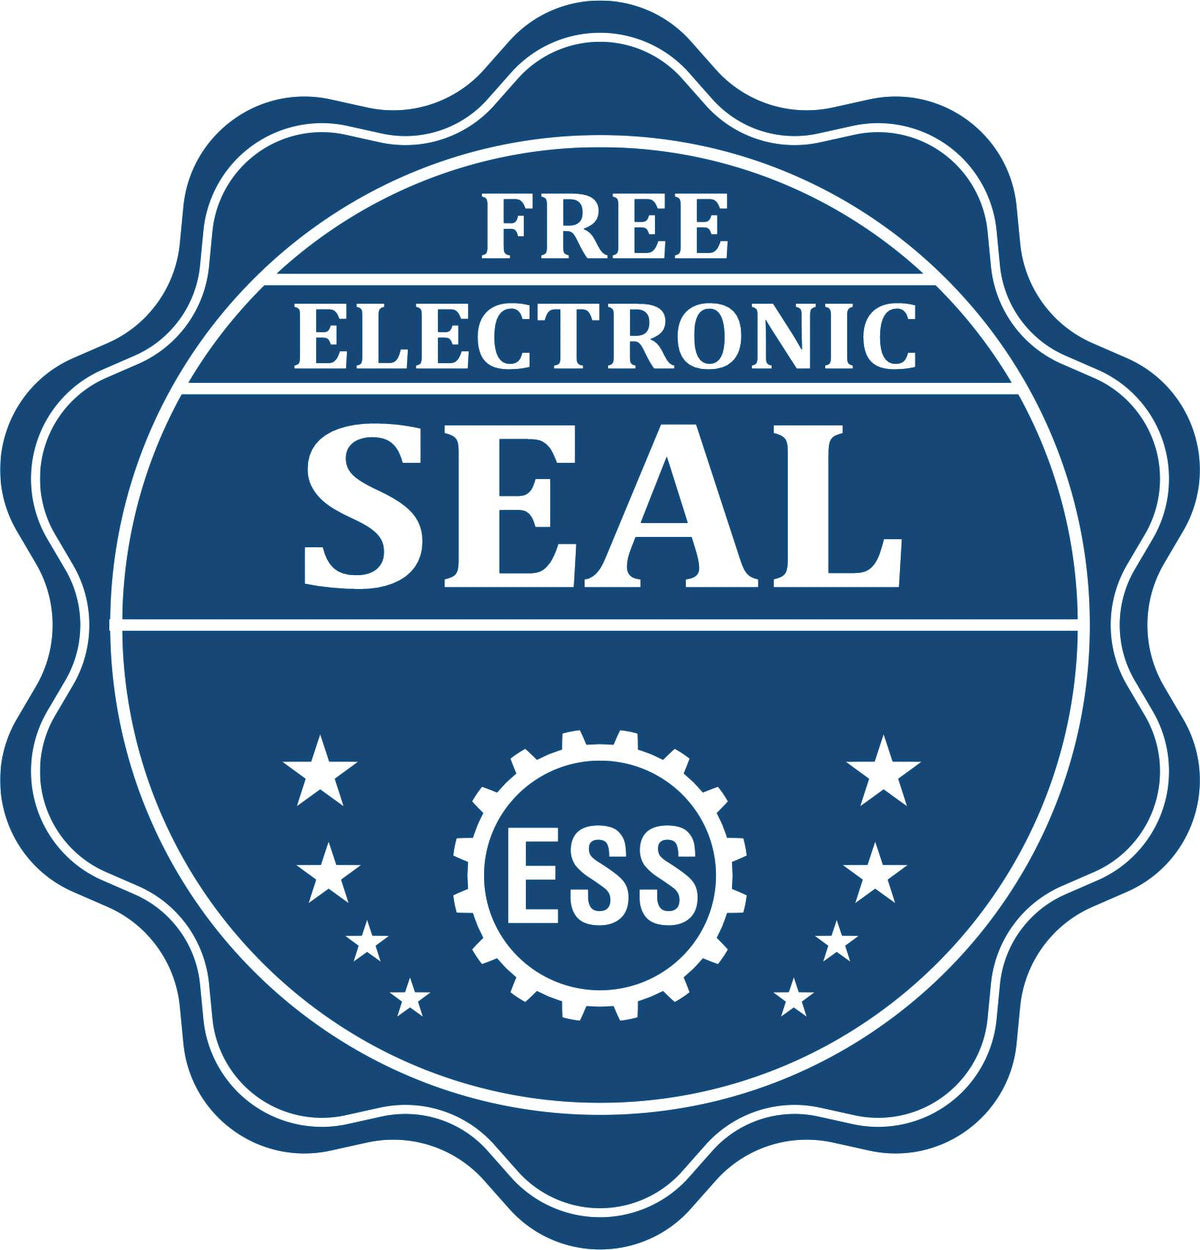 A badge showing a free electronic seal for the Premium MaxLight Pre-Inked Kentucky Geology Stamp with stars and the ESS gear on the emblem.